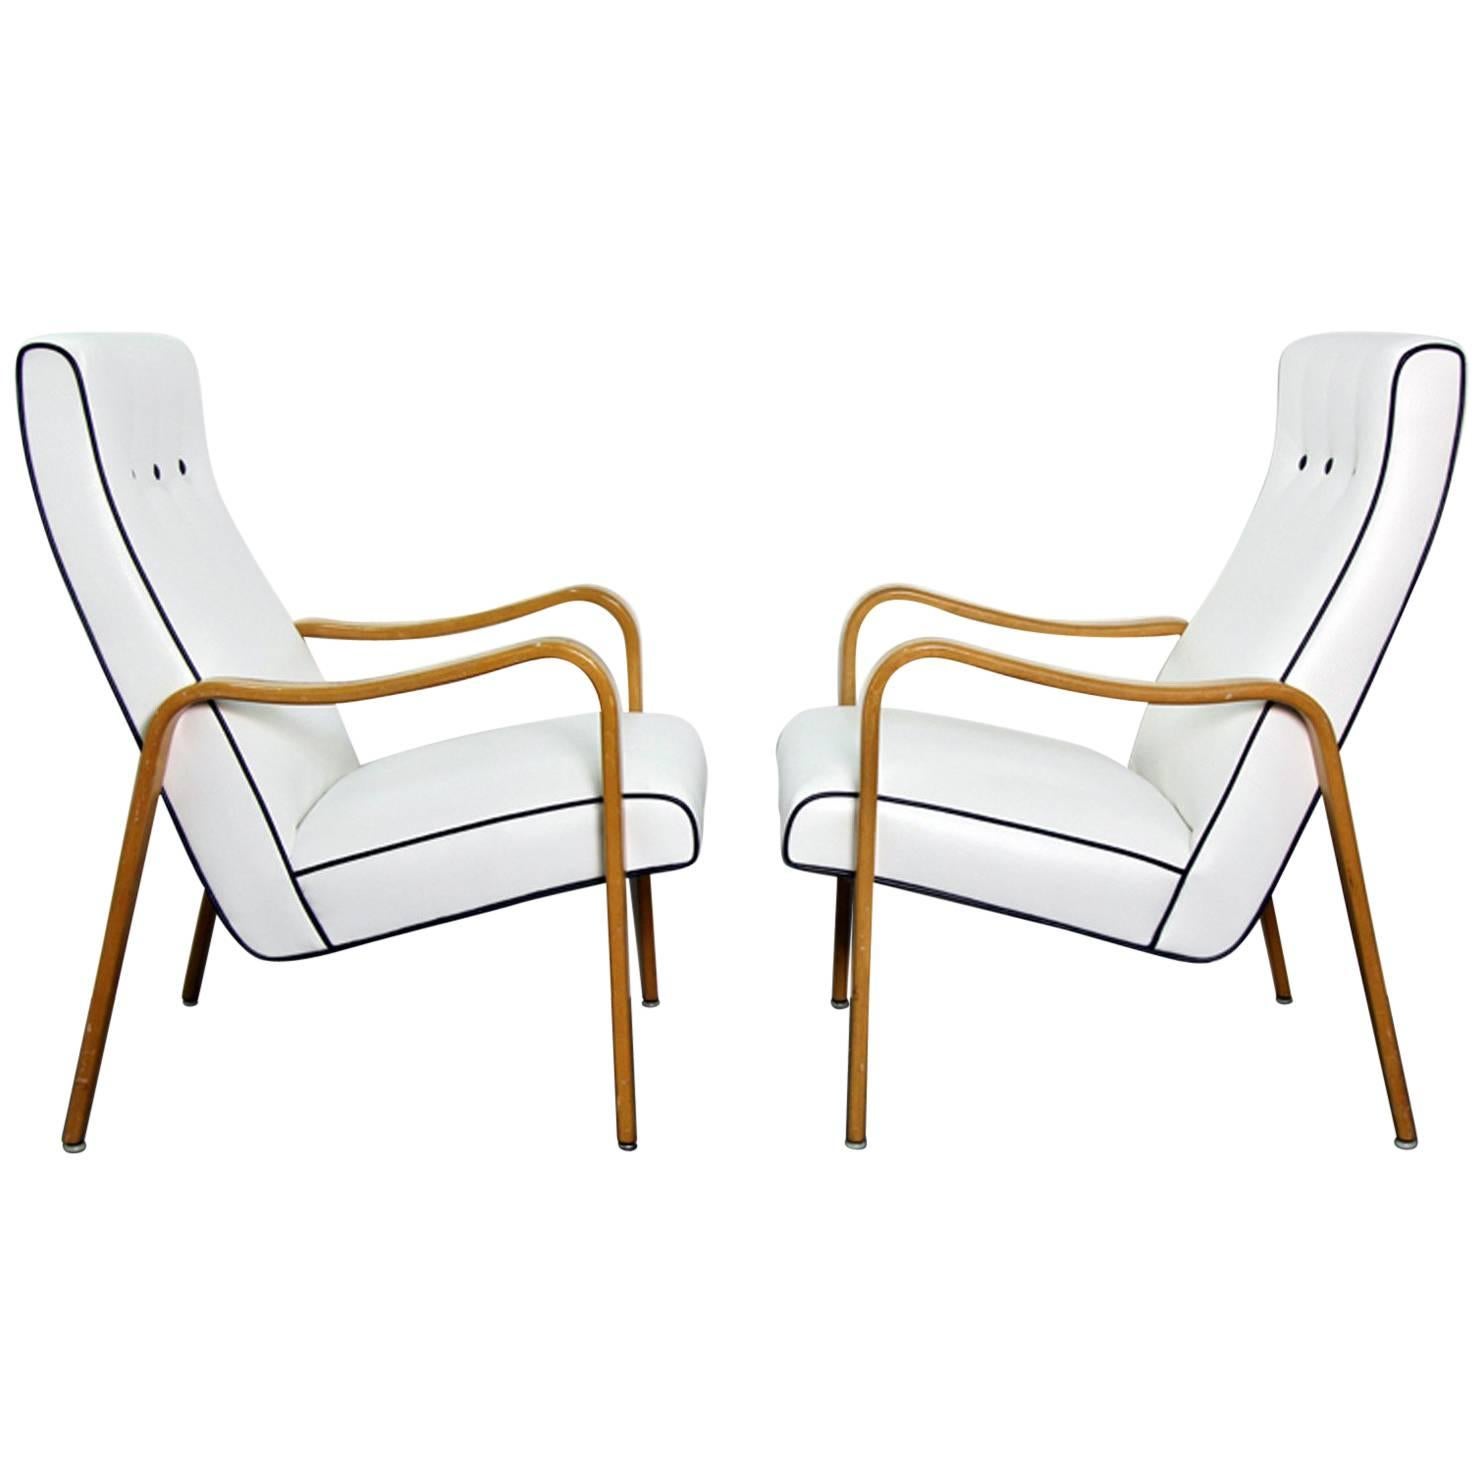 Pair of Thonet Bentwood Armchairs with New Upholstery in Contrast Piping For Sale